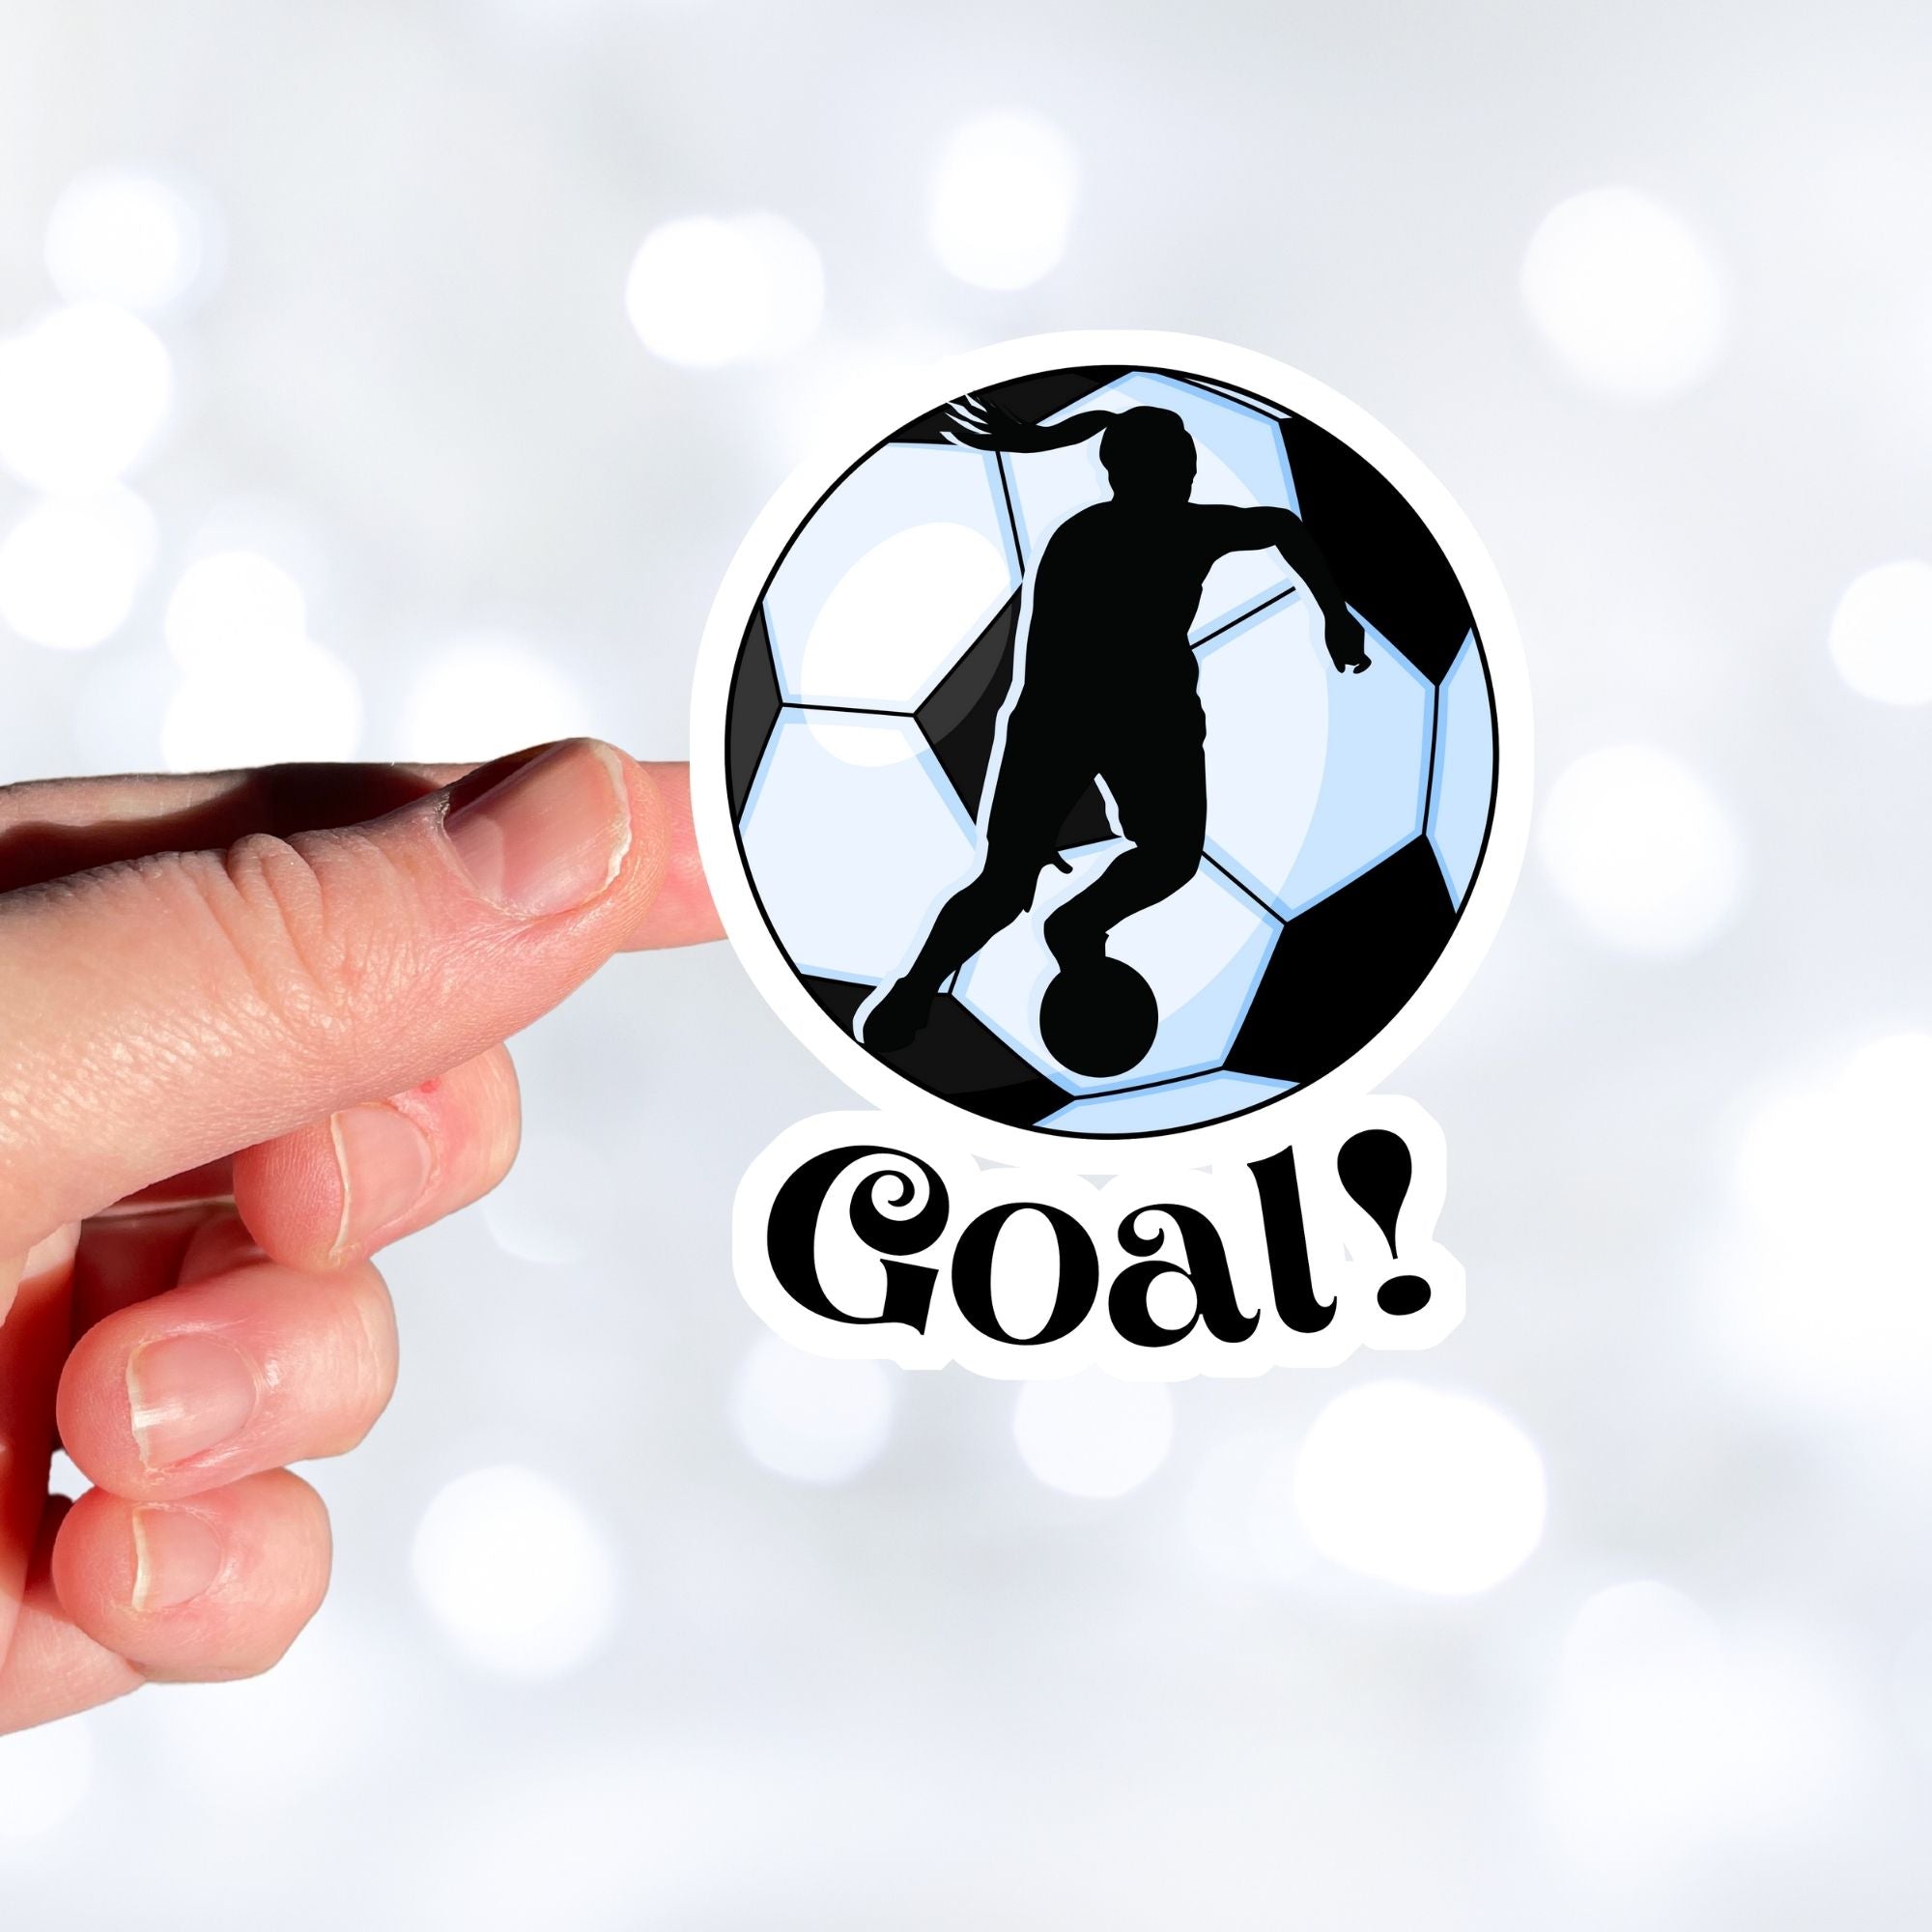 Show your love of soccer, or football, with this individual die-cut sticker! This sticker shows the silhouette of a player with a ponytail about to kick, on a black and white/blue soccer ball background, with the word "Goal!" below. This image shows a hand holding the soccer sticker.